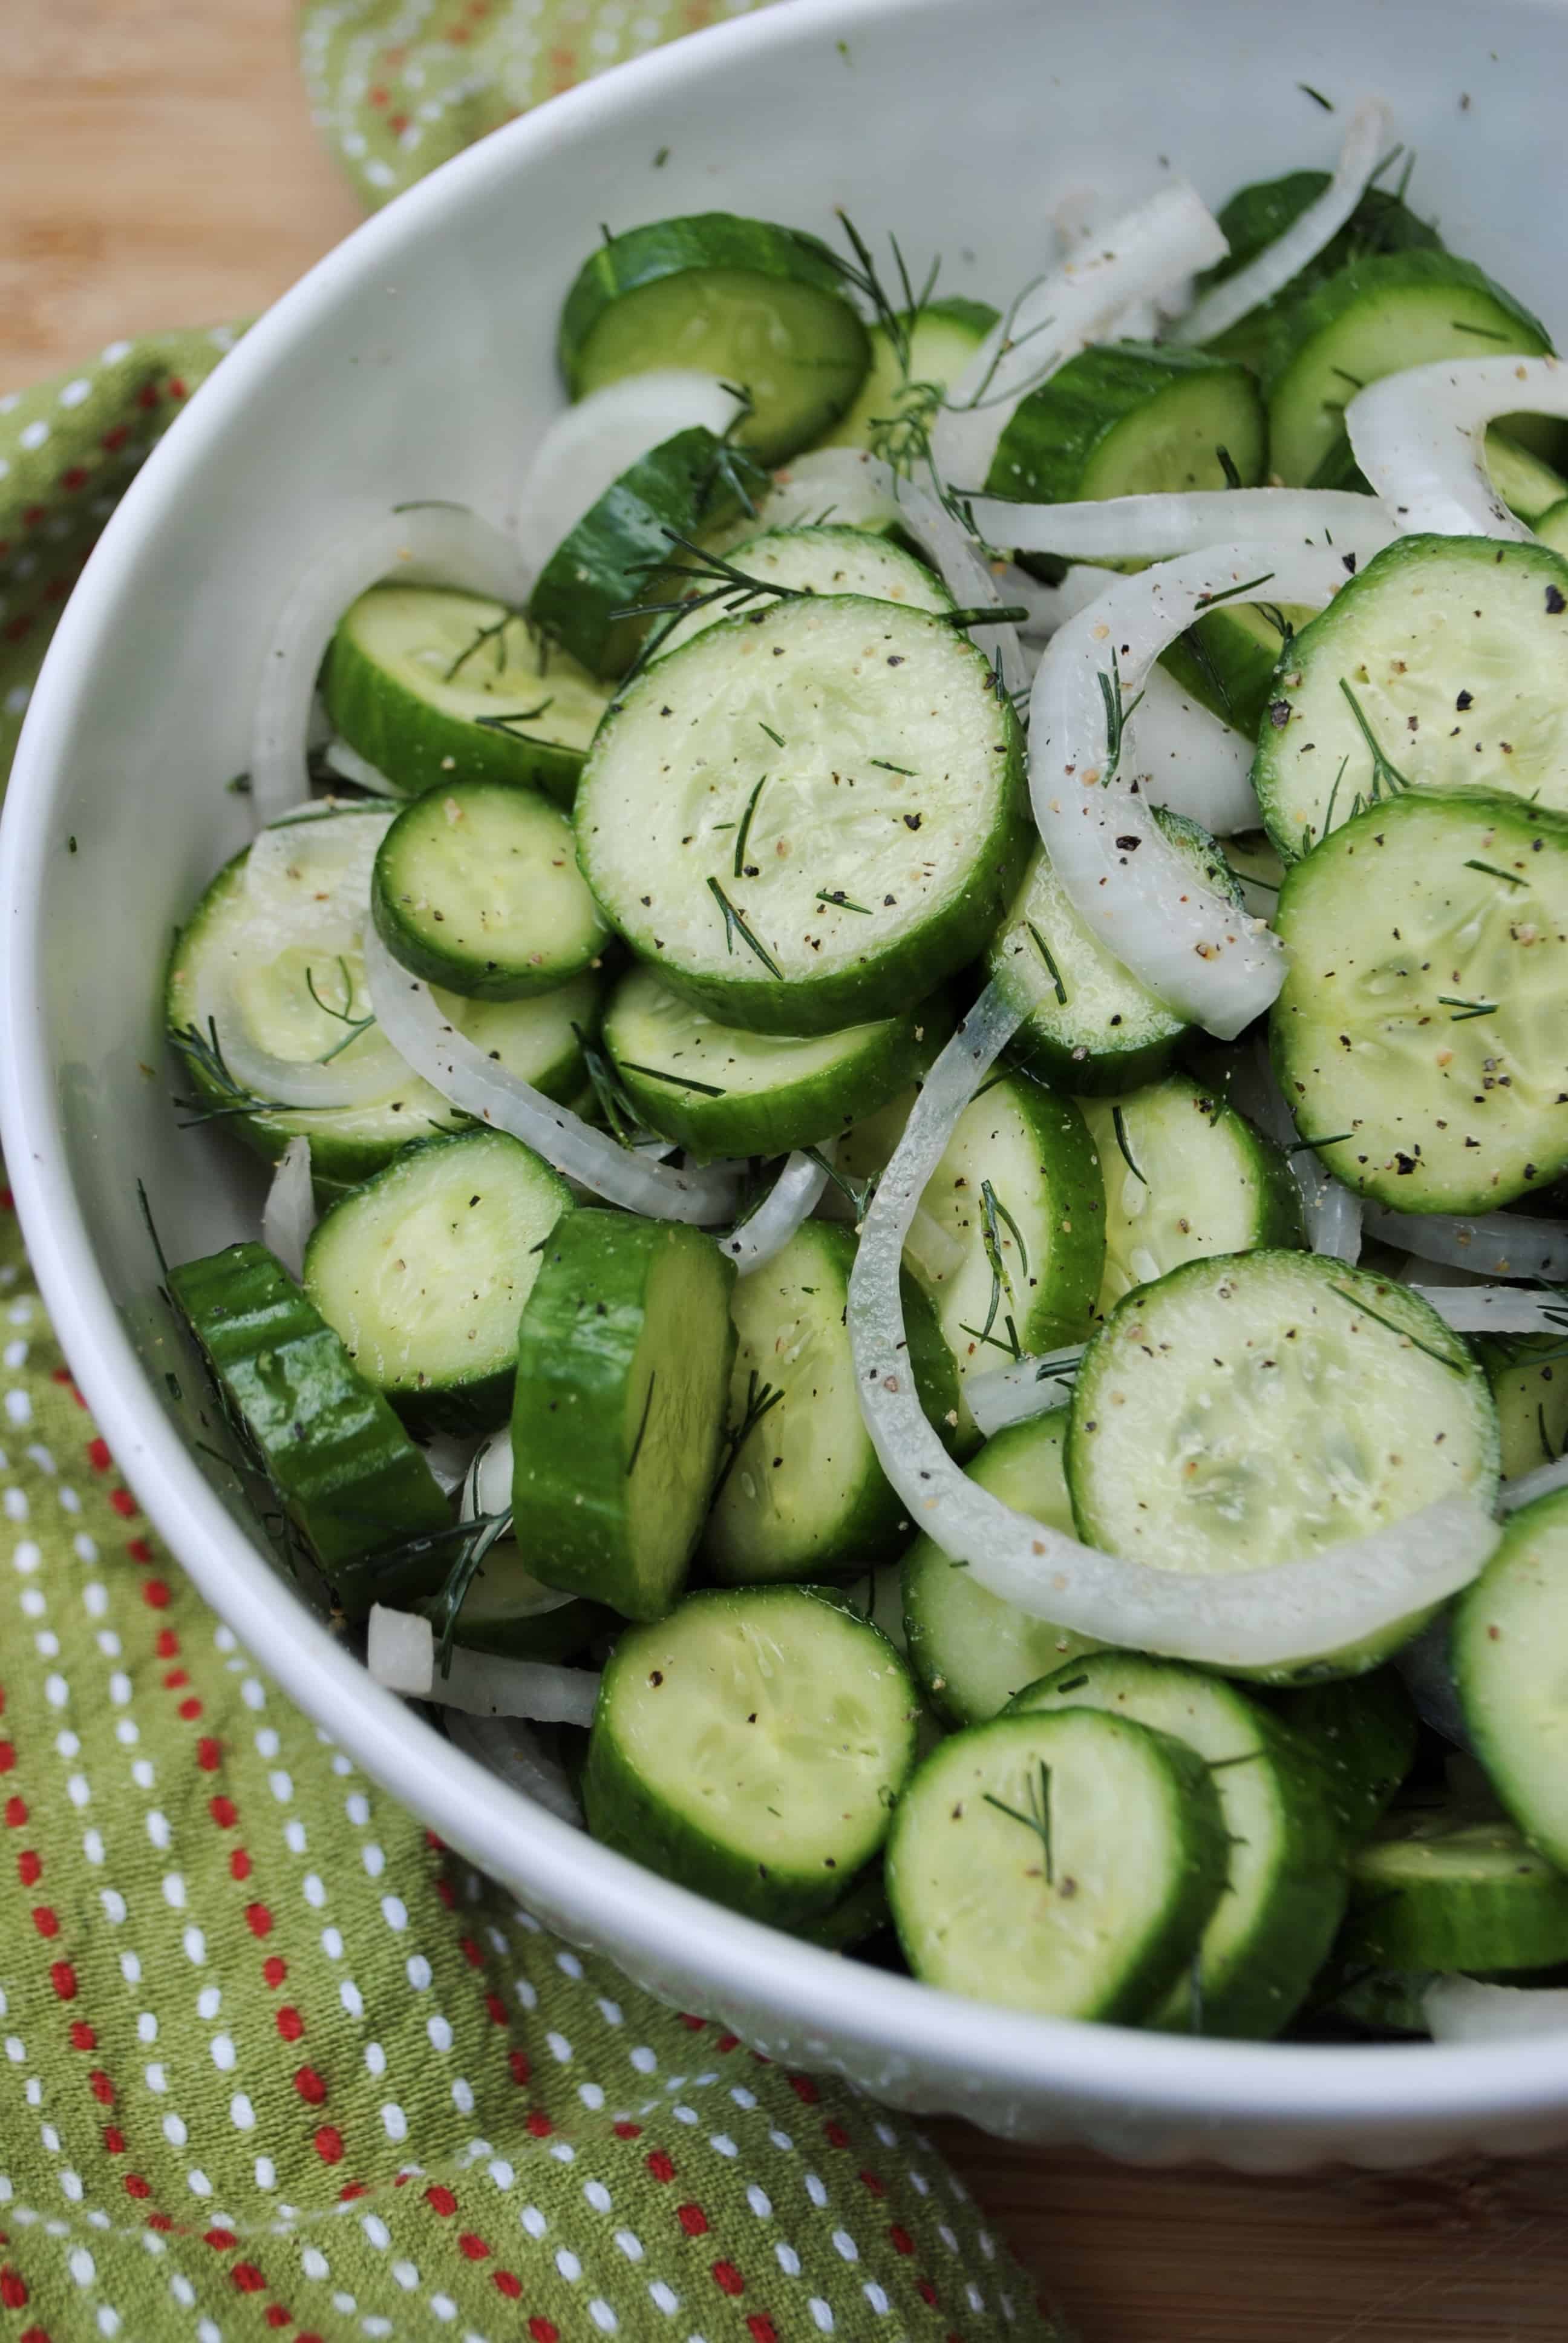 Simple cucumber and dill salad.